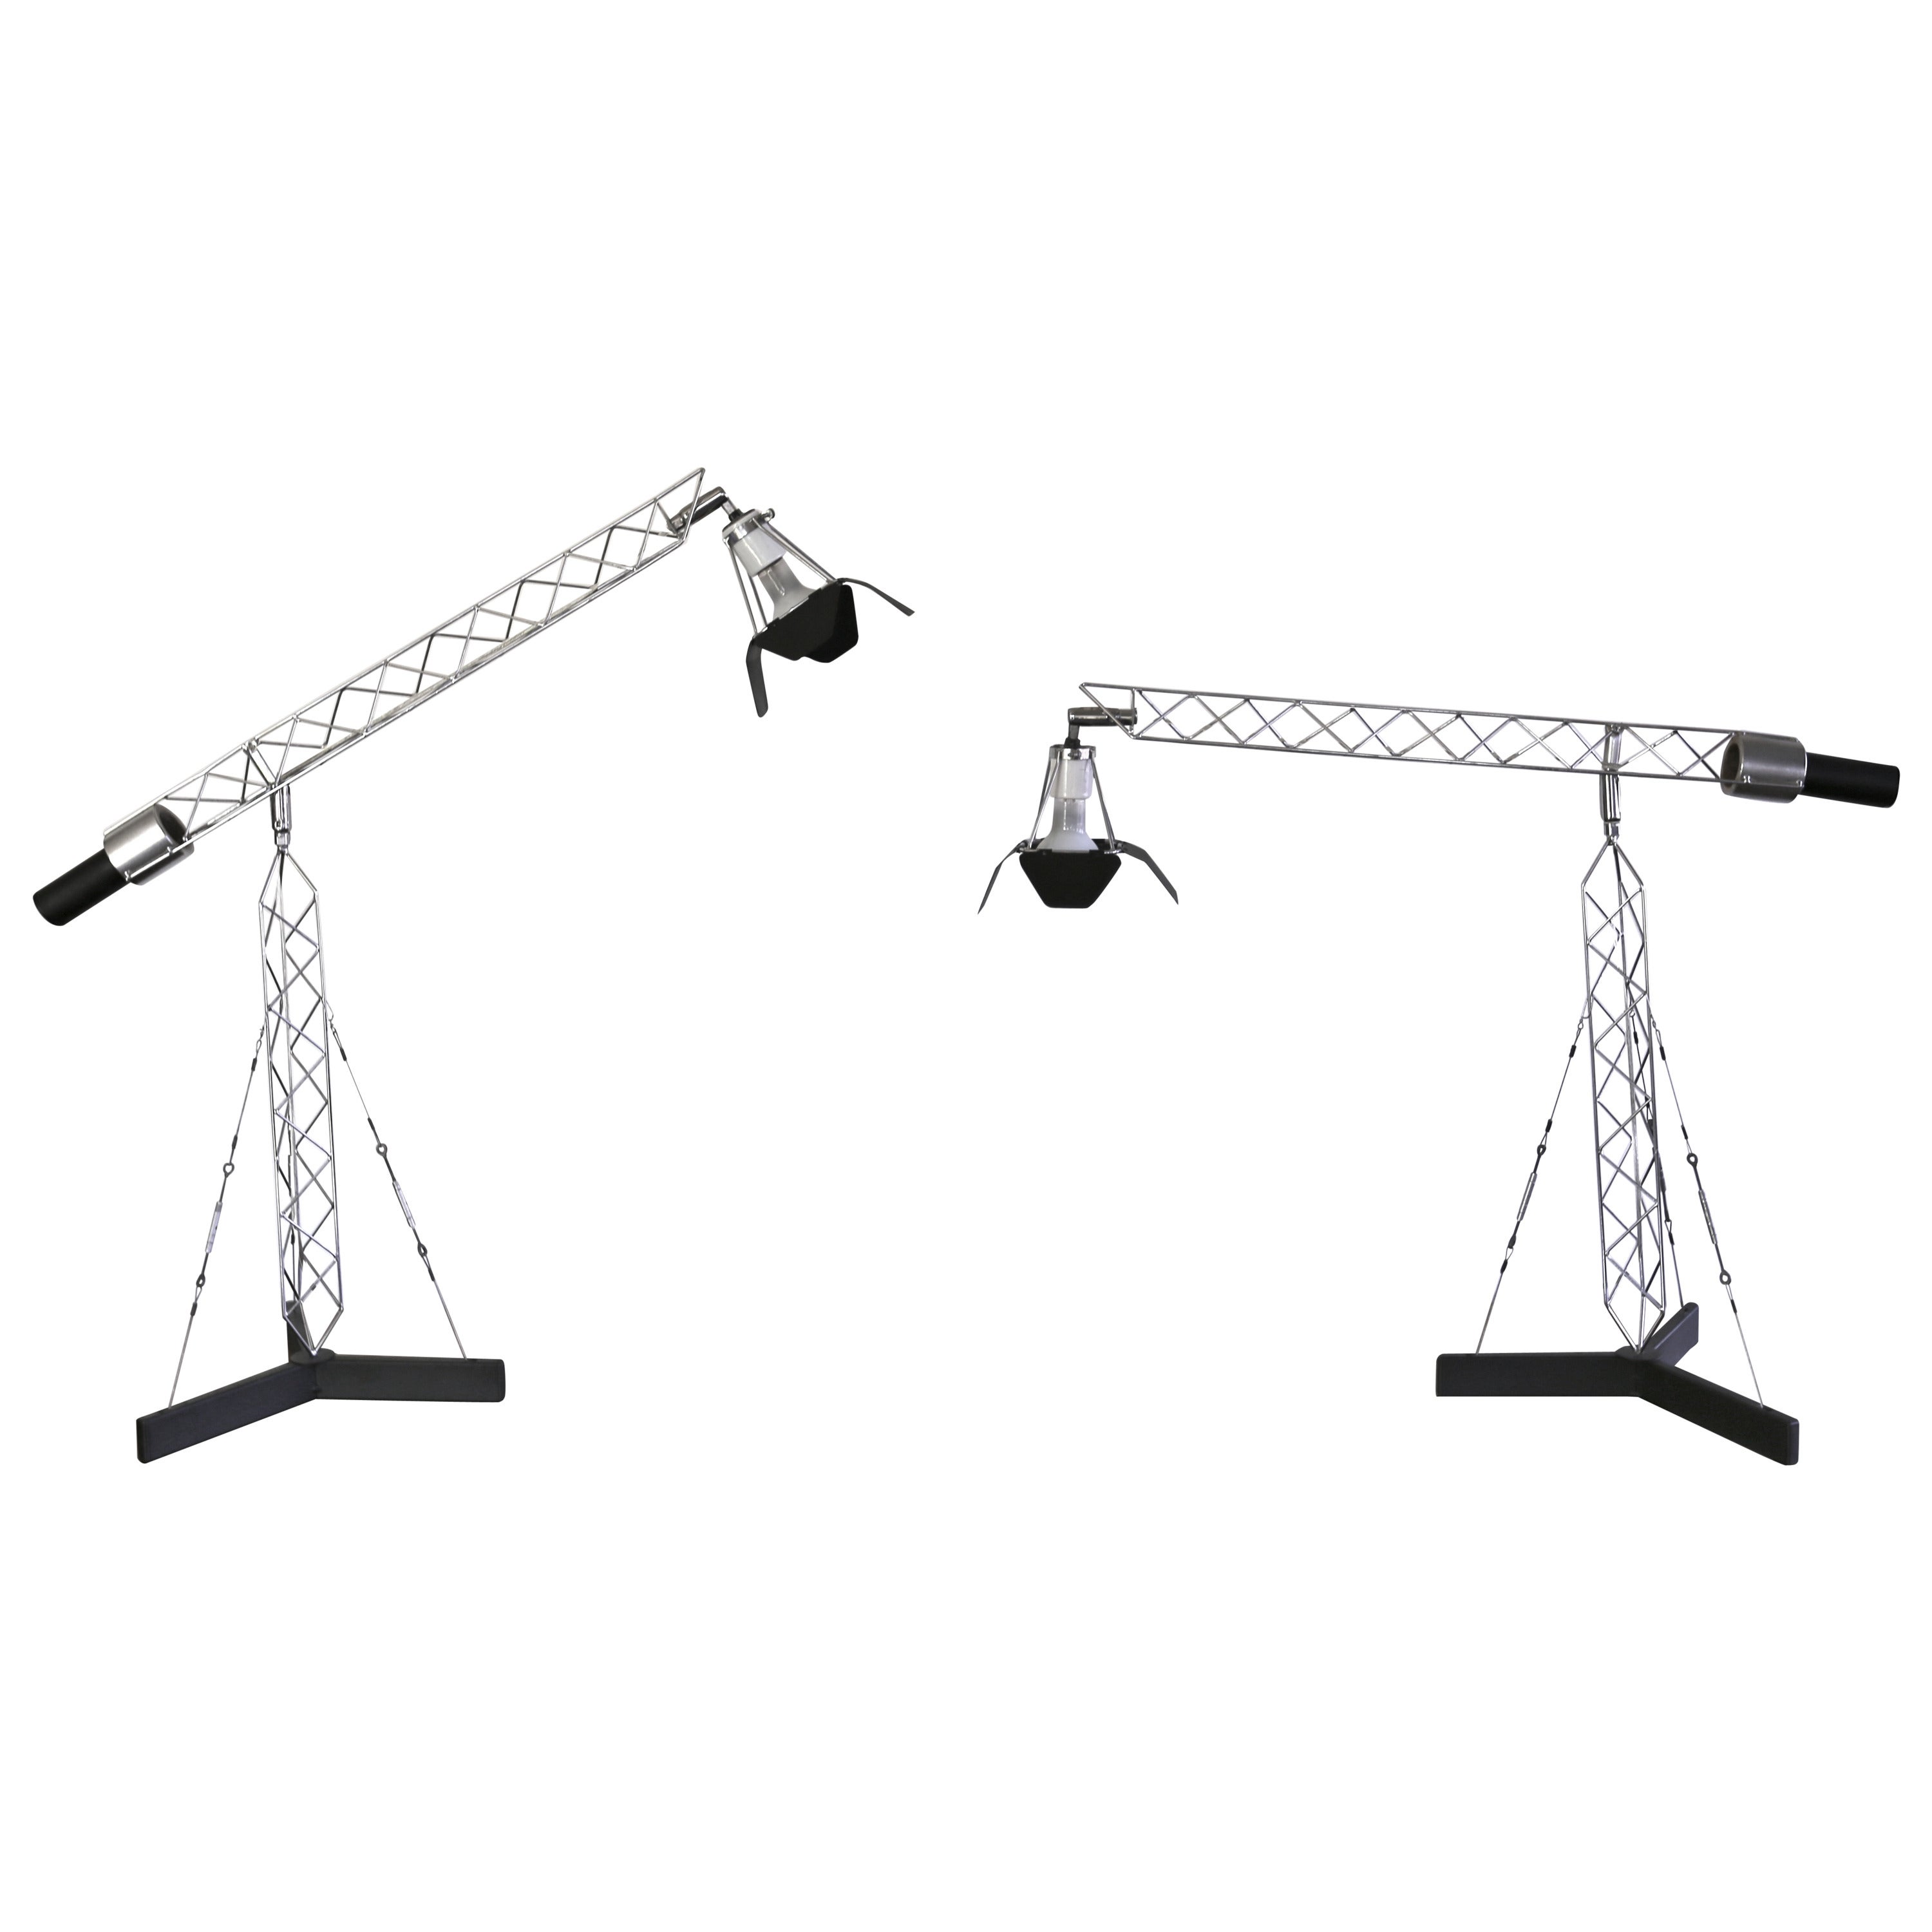 Pair of "Crane" Table Lamps by Curtis Jere